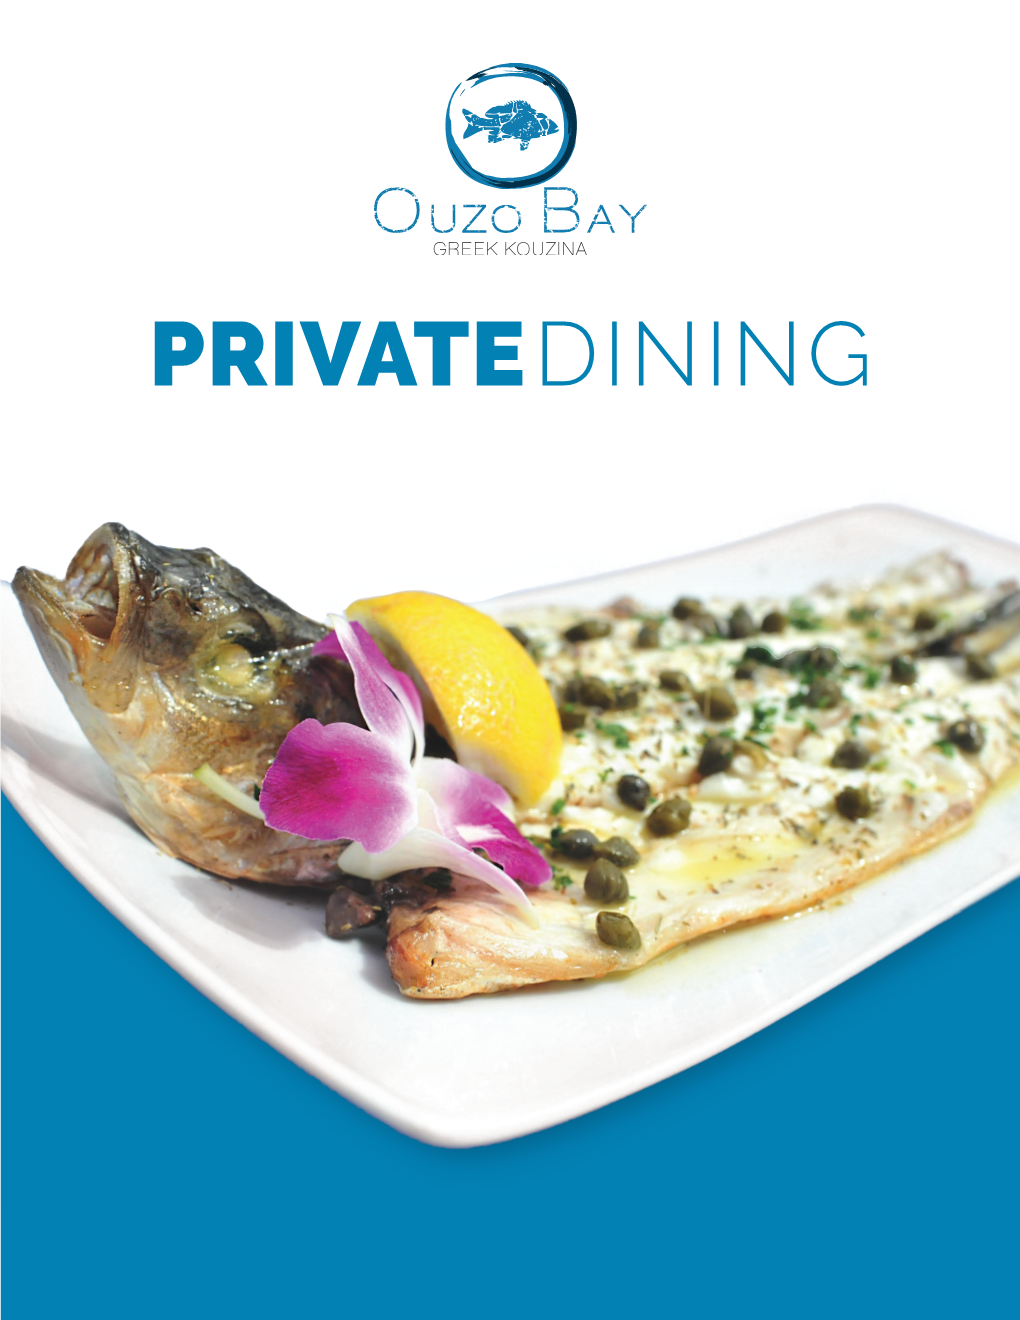 PRIVATEDINING “Contemporary Mediterranean Cuisine with a Strong Greek Influence”